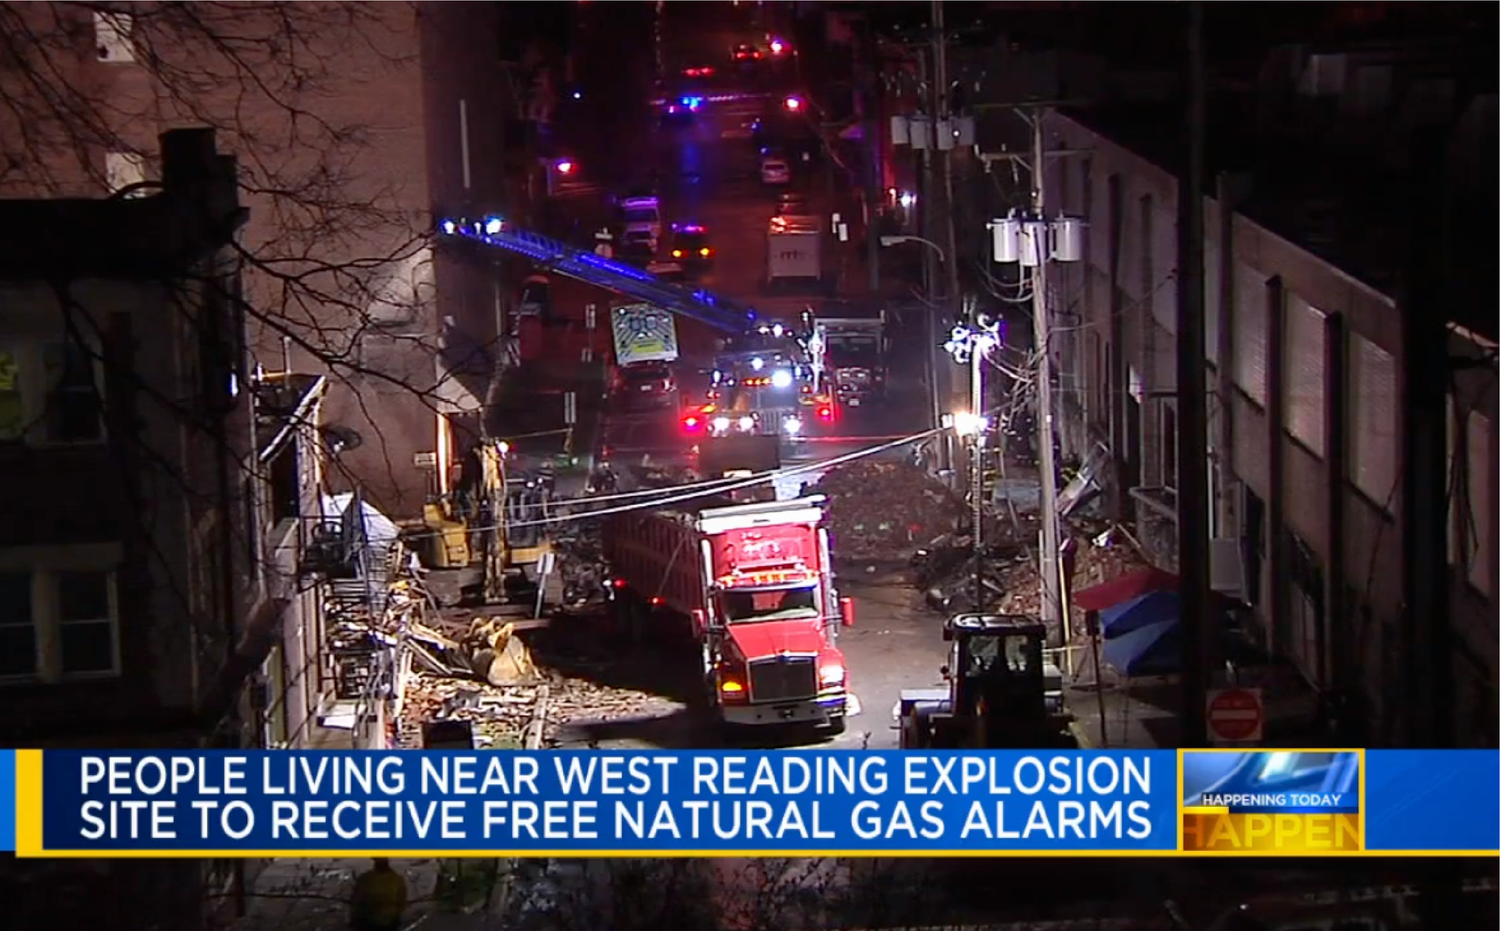 People Living Near West Reading Explosion Site to Receive Free Natural Gas Alarms